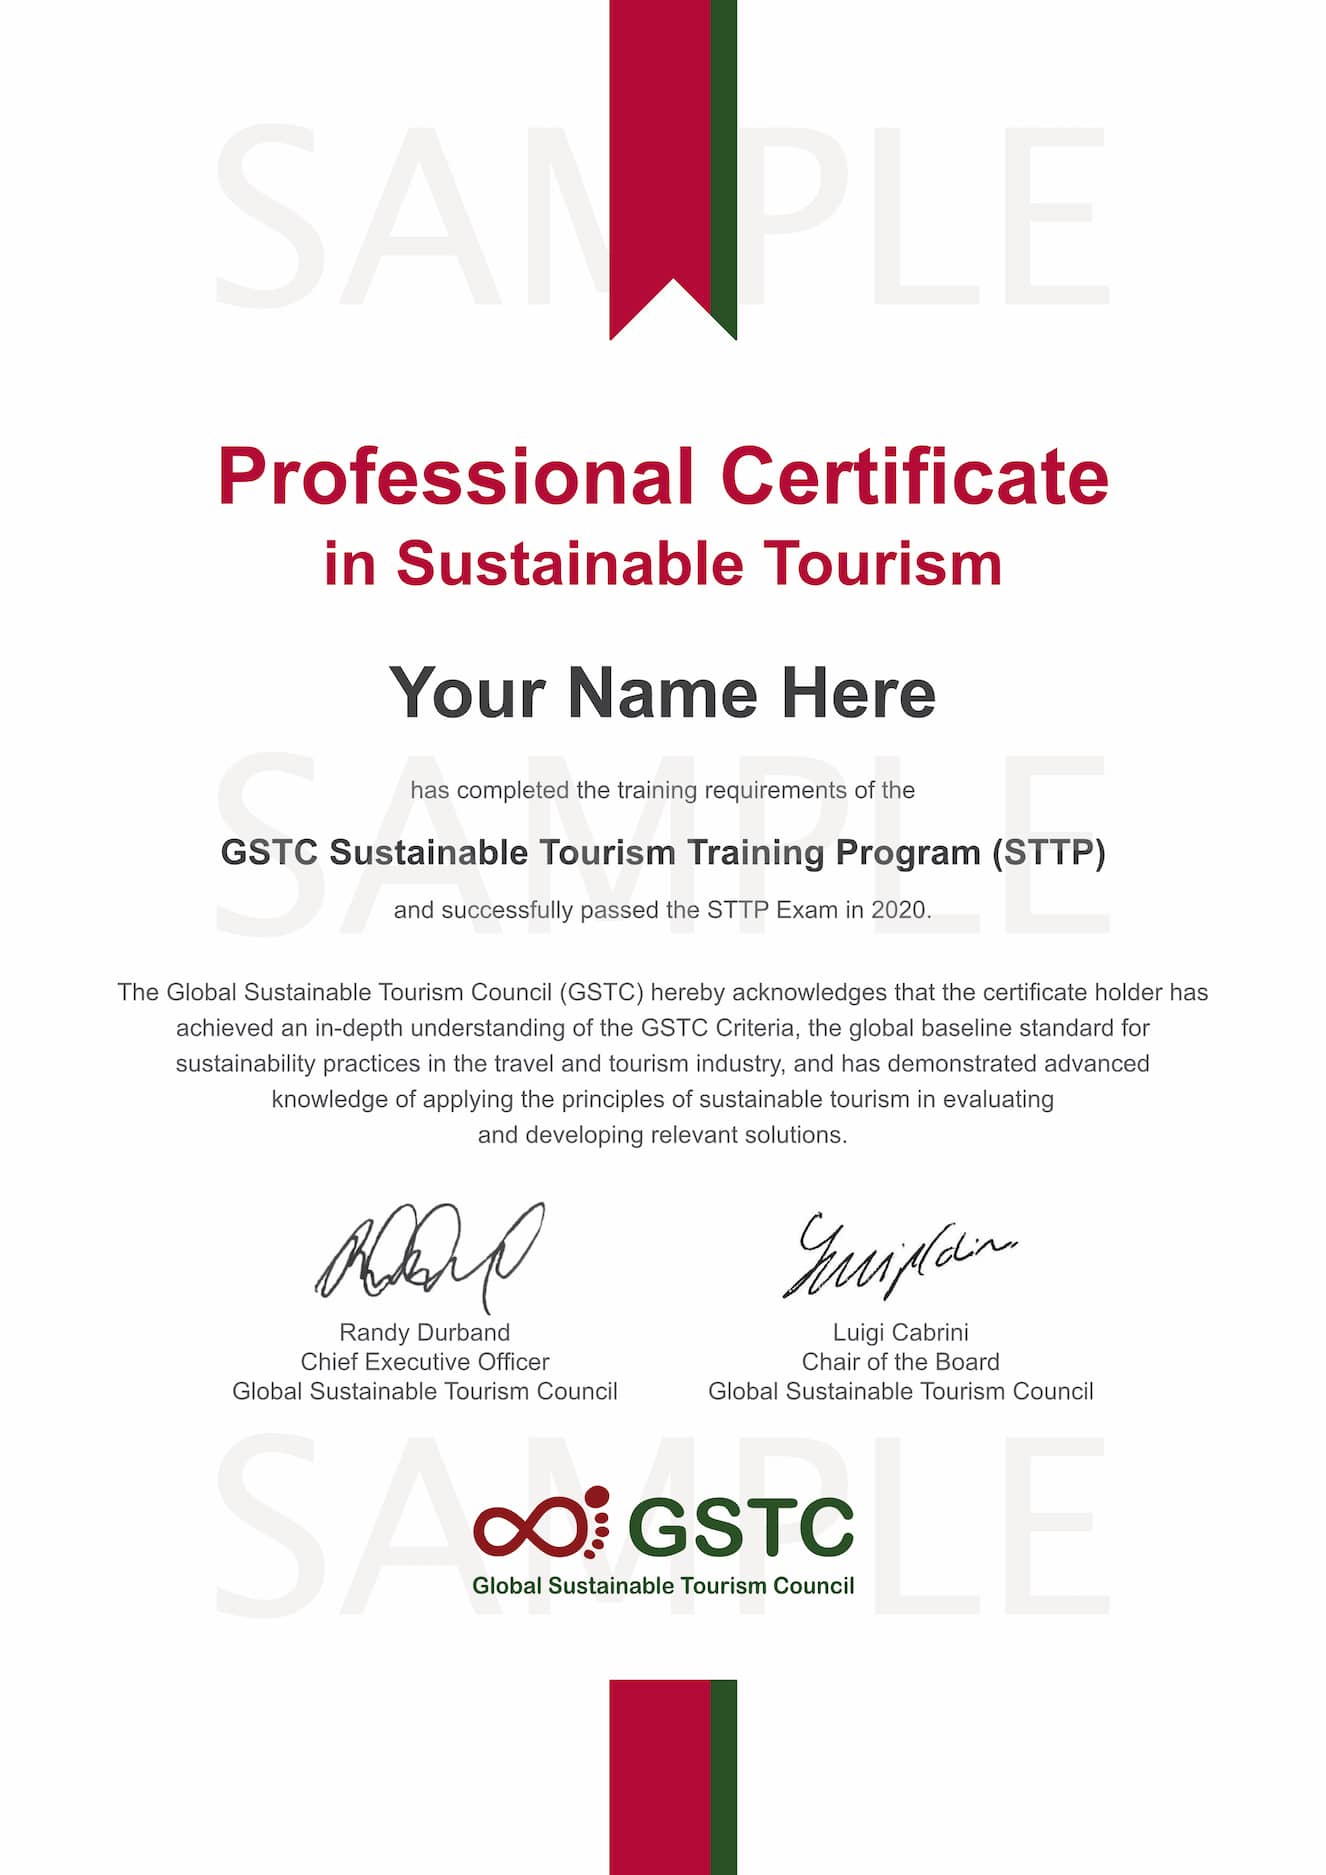 GSTC Certificate in Sustainable Tourism